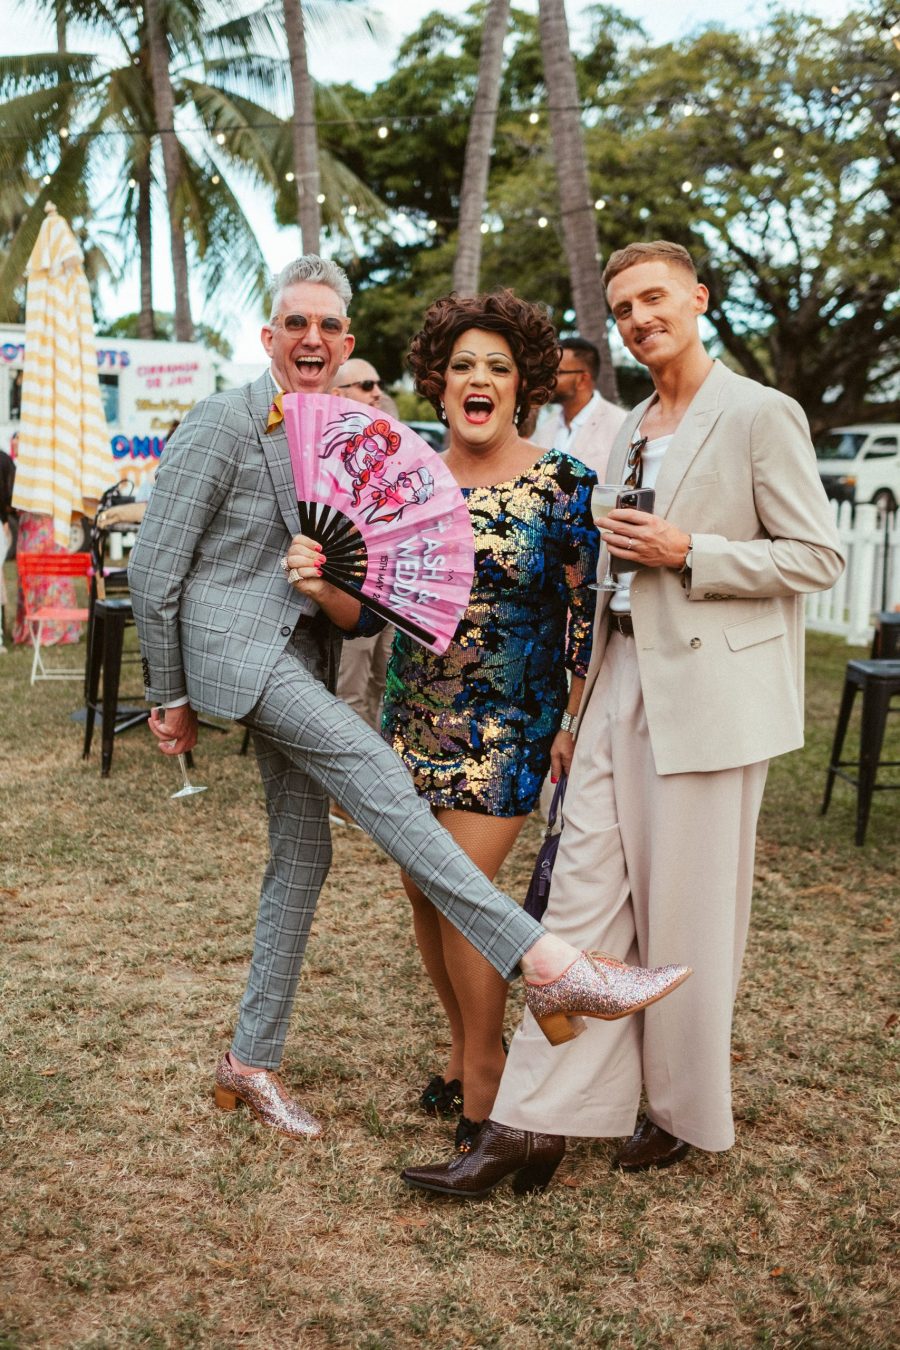 Three people feeling joyous at an event.